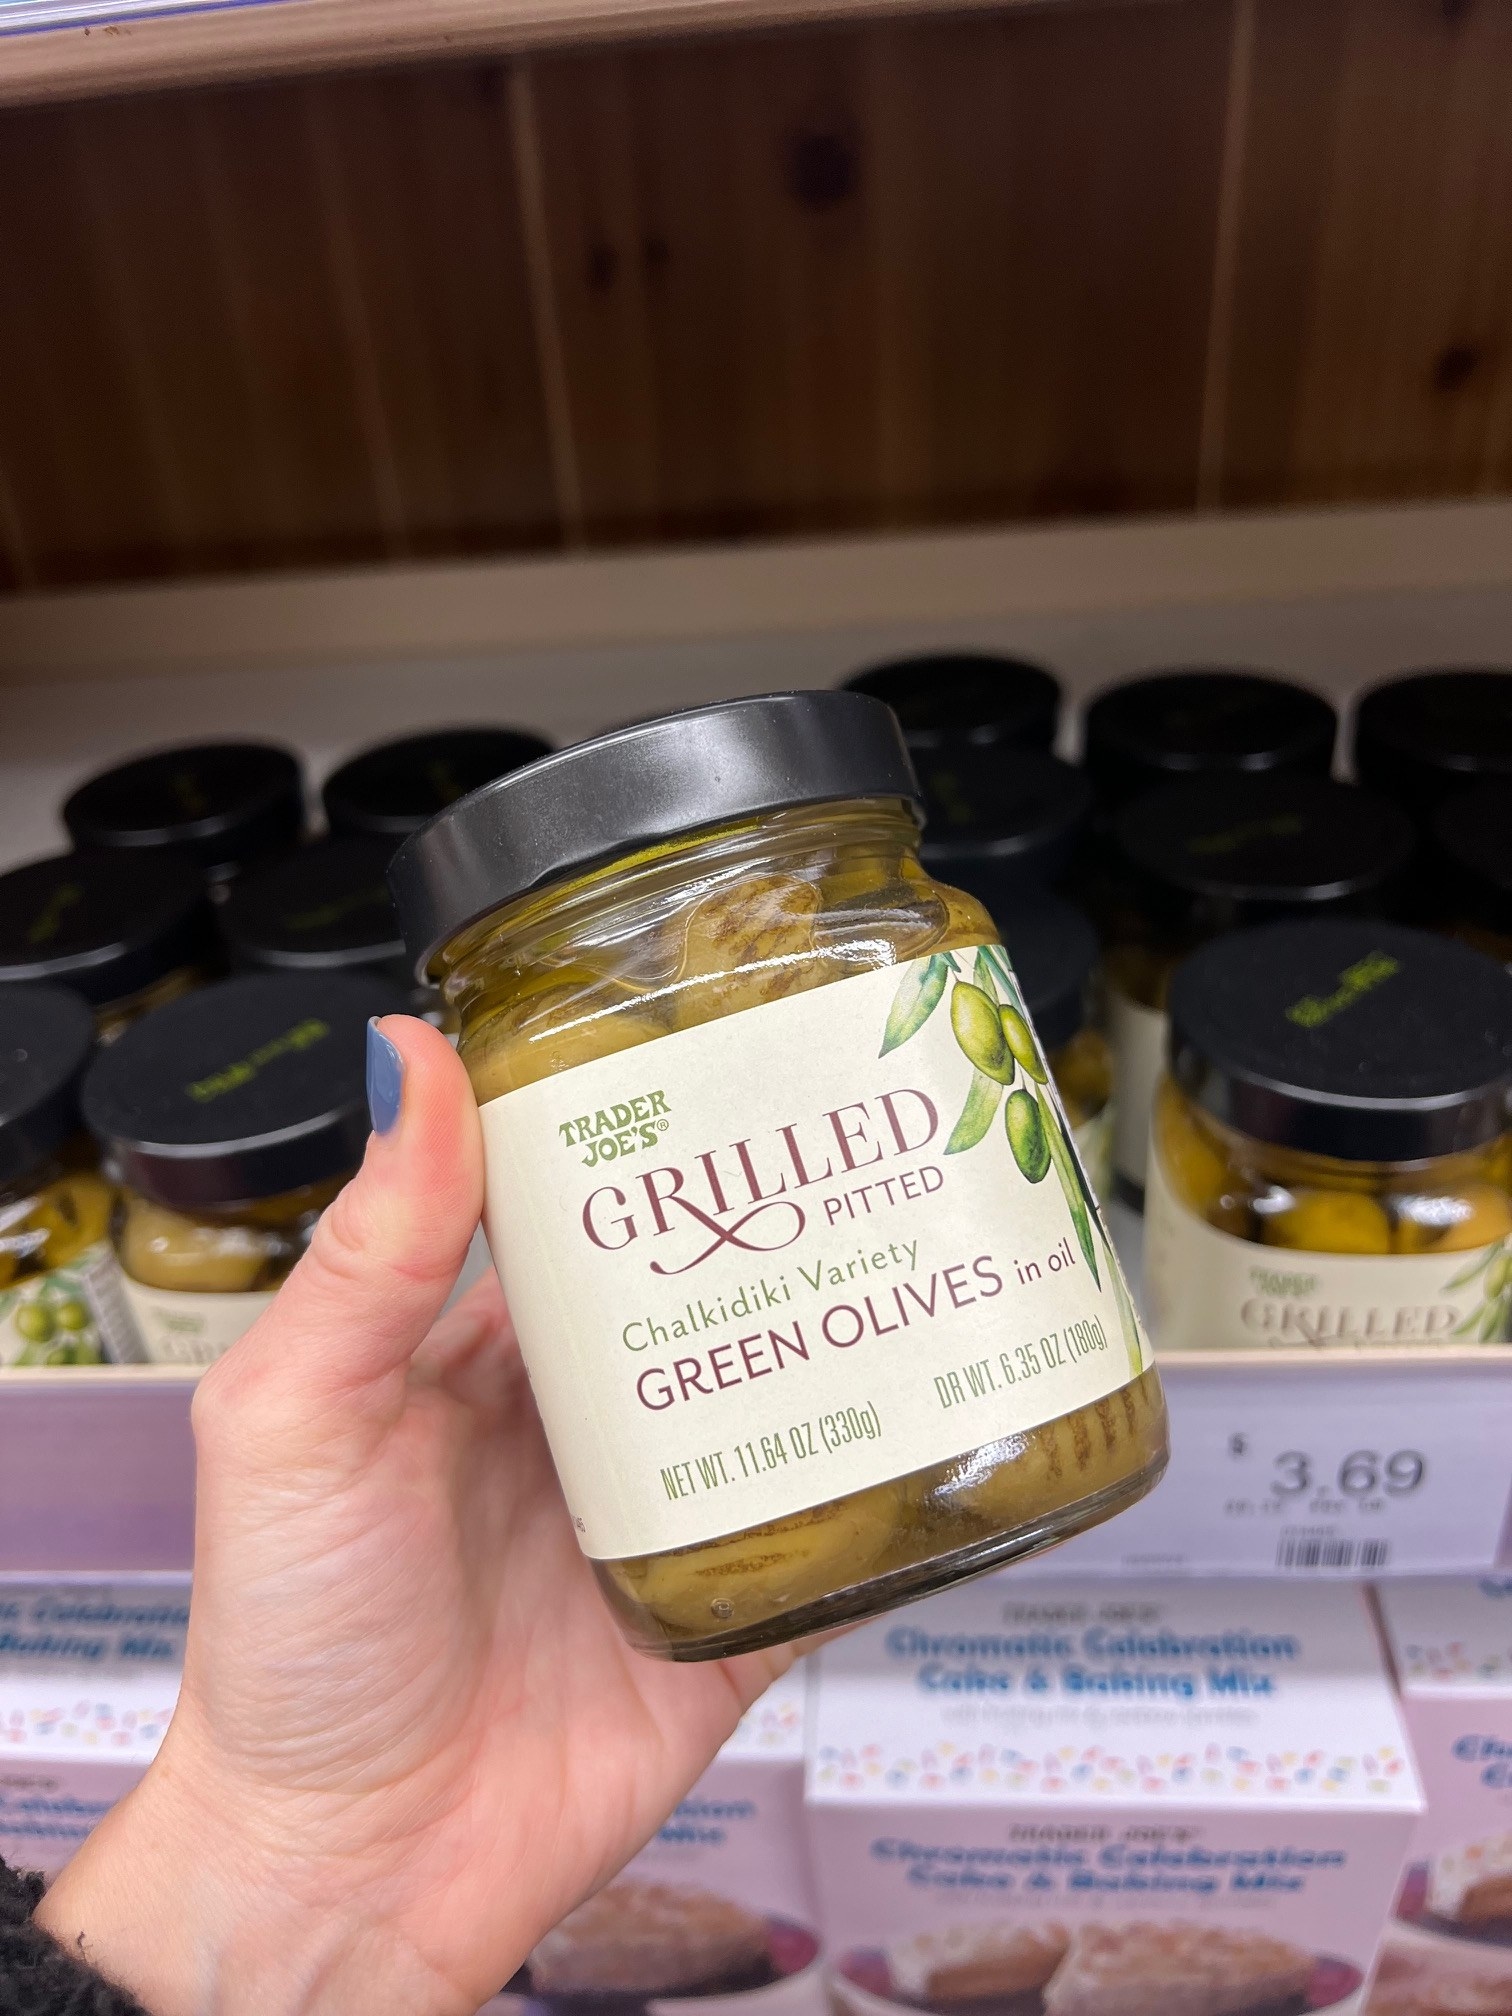 A jar of Grilled Pitted Green Olives In Oil